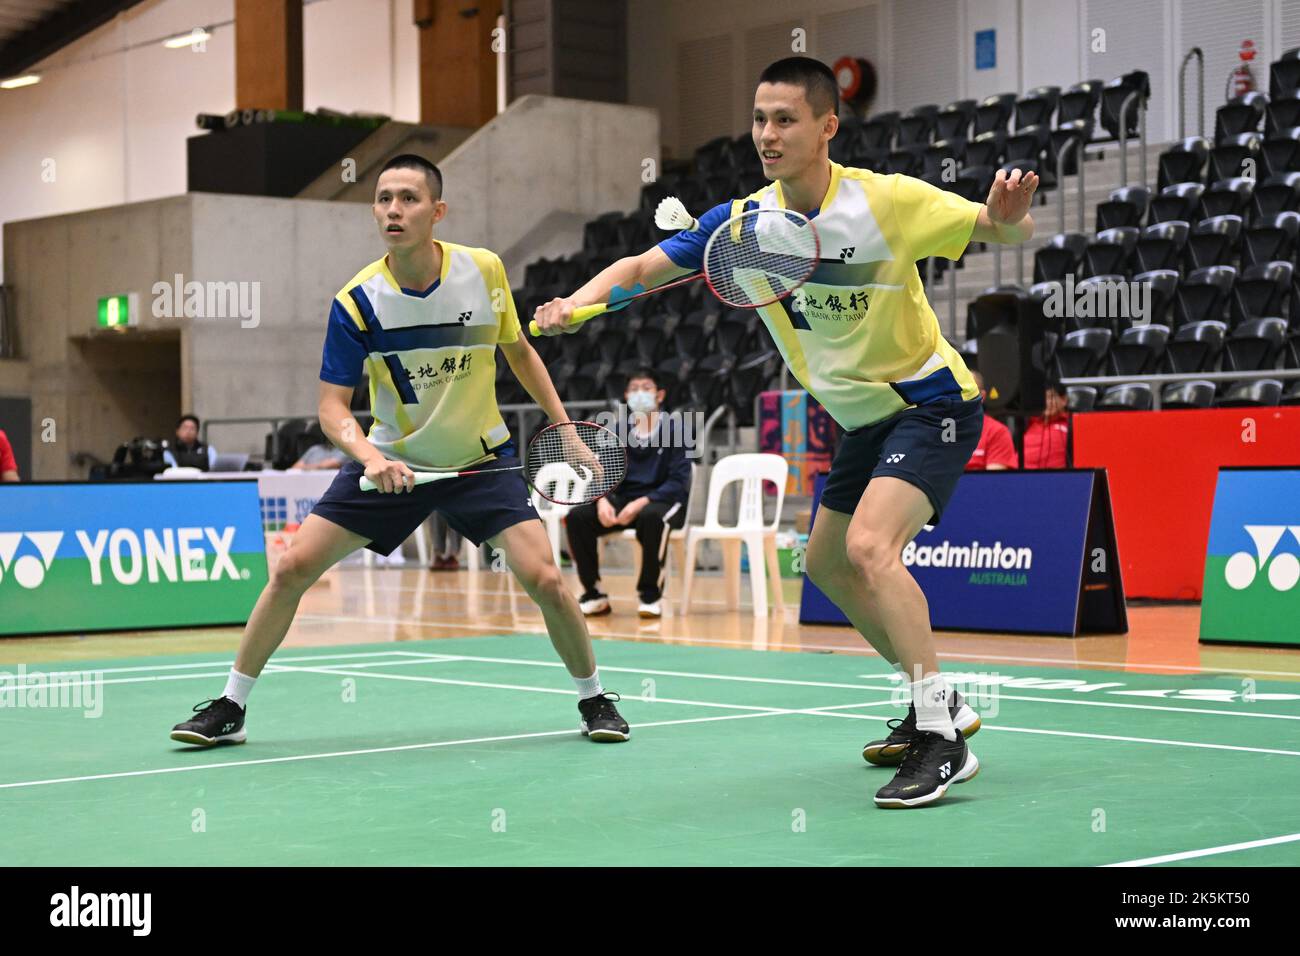 Sydney, Australia. 09th Oct, 2022. Llee Fang-Jen (L) and Lee Fang-Chih (R) of Chinese Taipei seen in action during the YONEX Sydney International 2022 Men's Double finals match against Nyl Yakura and adam xingyu dong (Canada). Lee Fang-Jen and Lee Fang-Chih won the match 21-12, 16-21, 21-16. Credit: SOPA Images Limited/Alamy Live News Stock Photo